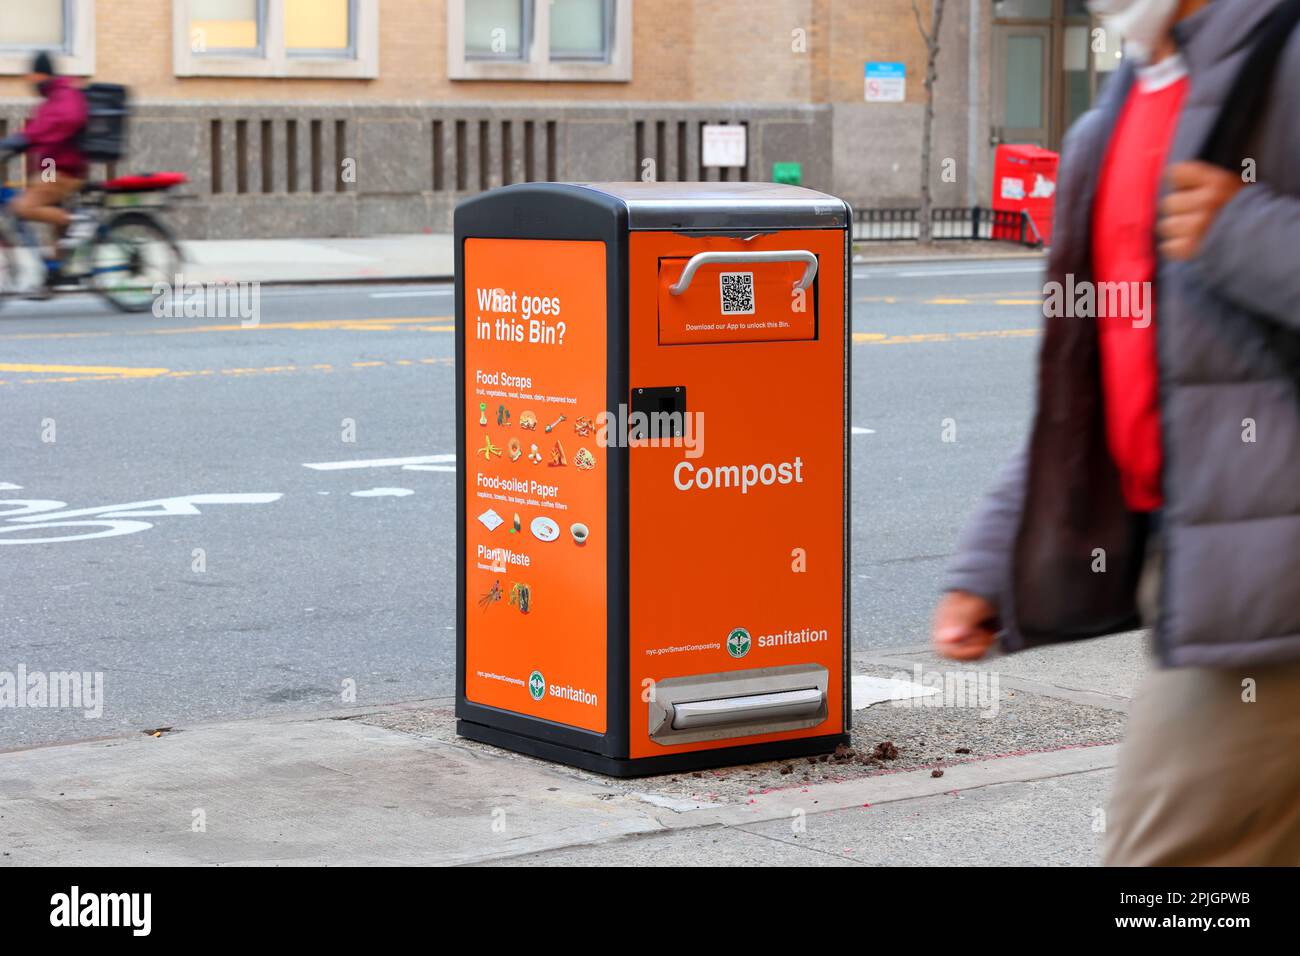 A NYC Smart Compost bin on a street in Upper Manhattan, New York City. These collection bins are unlocked via an app. Compost contents are liquified ... Stock Photo